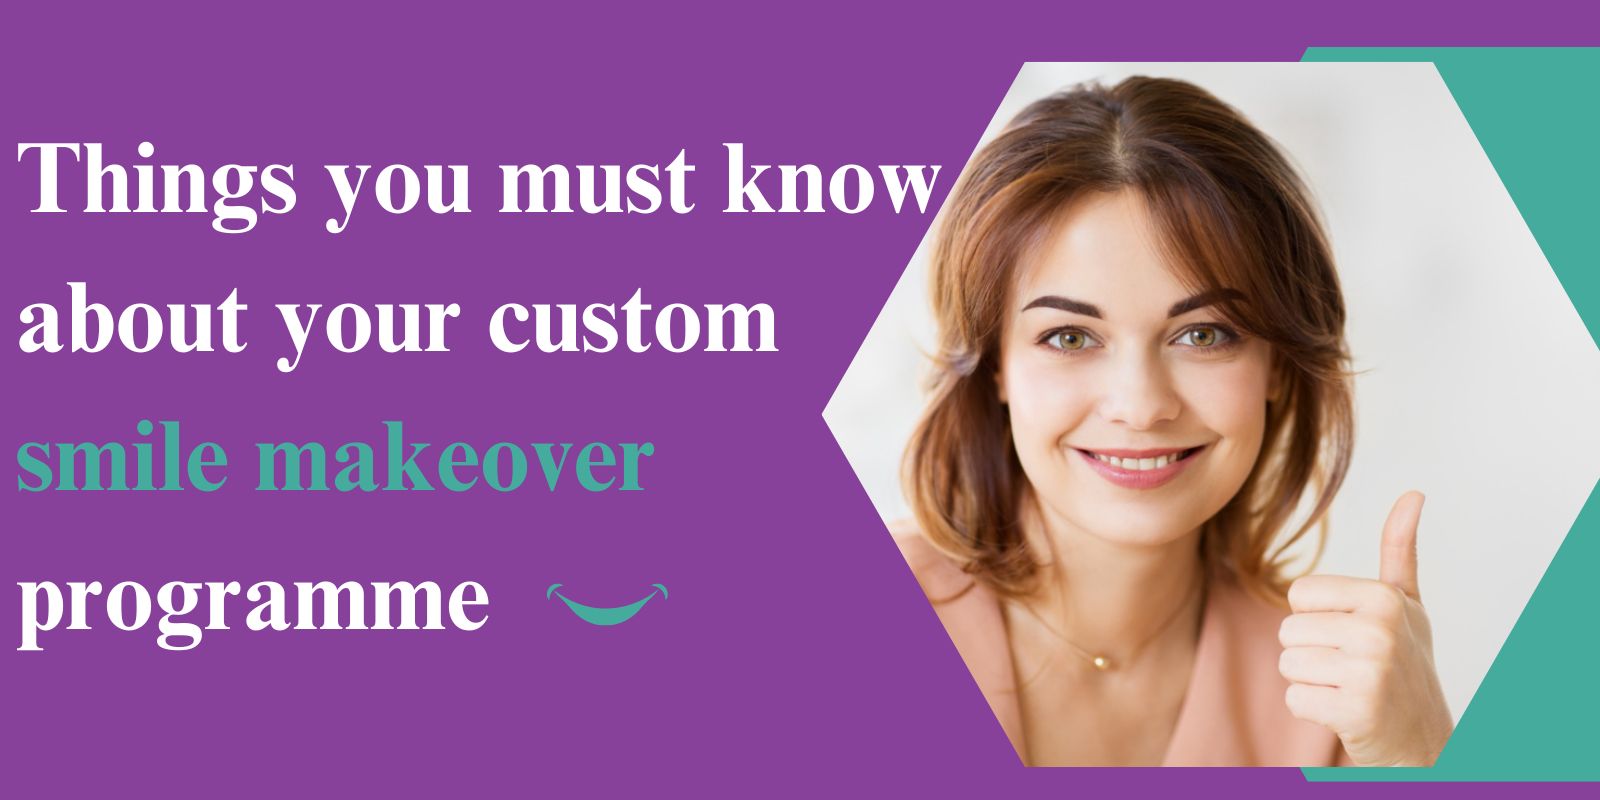 Things you must know about your custom smile makeover programme